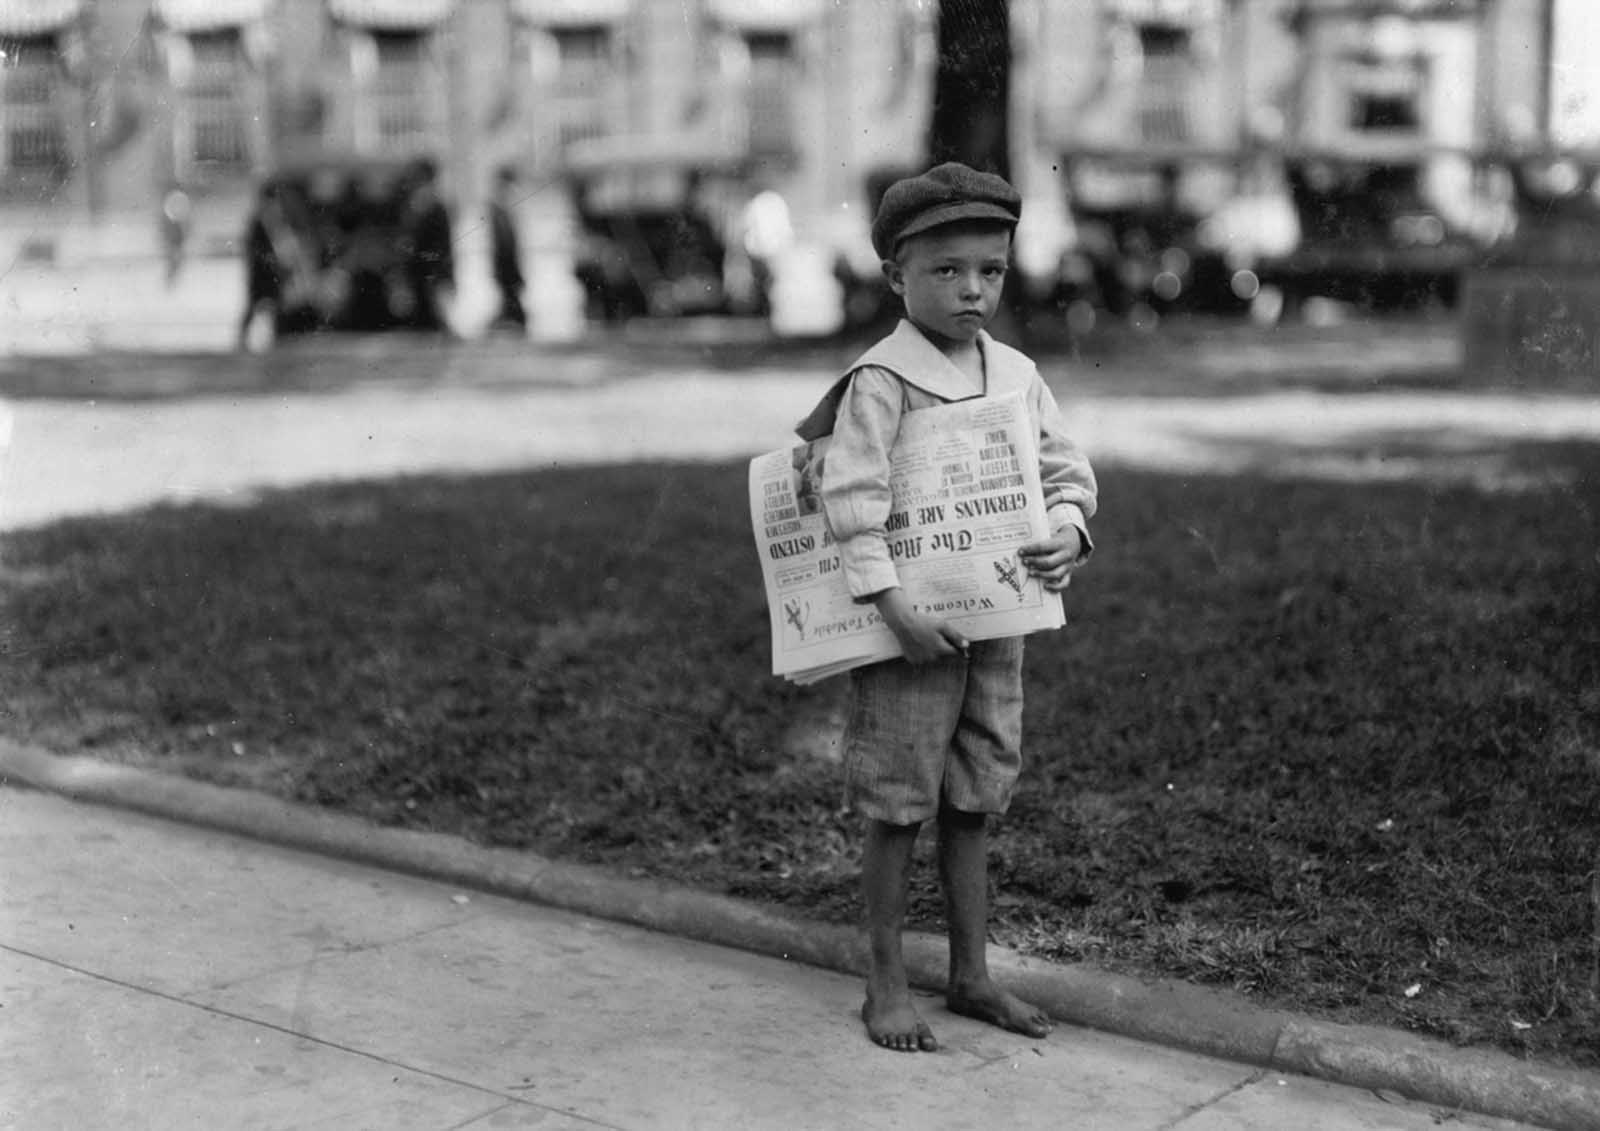 7-year-old year old Ferris, a small newsboy, or “newsie”, who did not know enough to make change. Photographed in Mobile, Alabama, in October of 1914. The newspapers he holds are copies of The Mobile Item, with the headline “Germans Are Driven Out Of Ostend,” describing the end of the Siege of Antwerp in World War I.